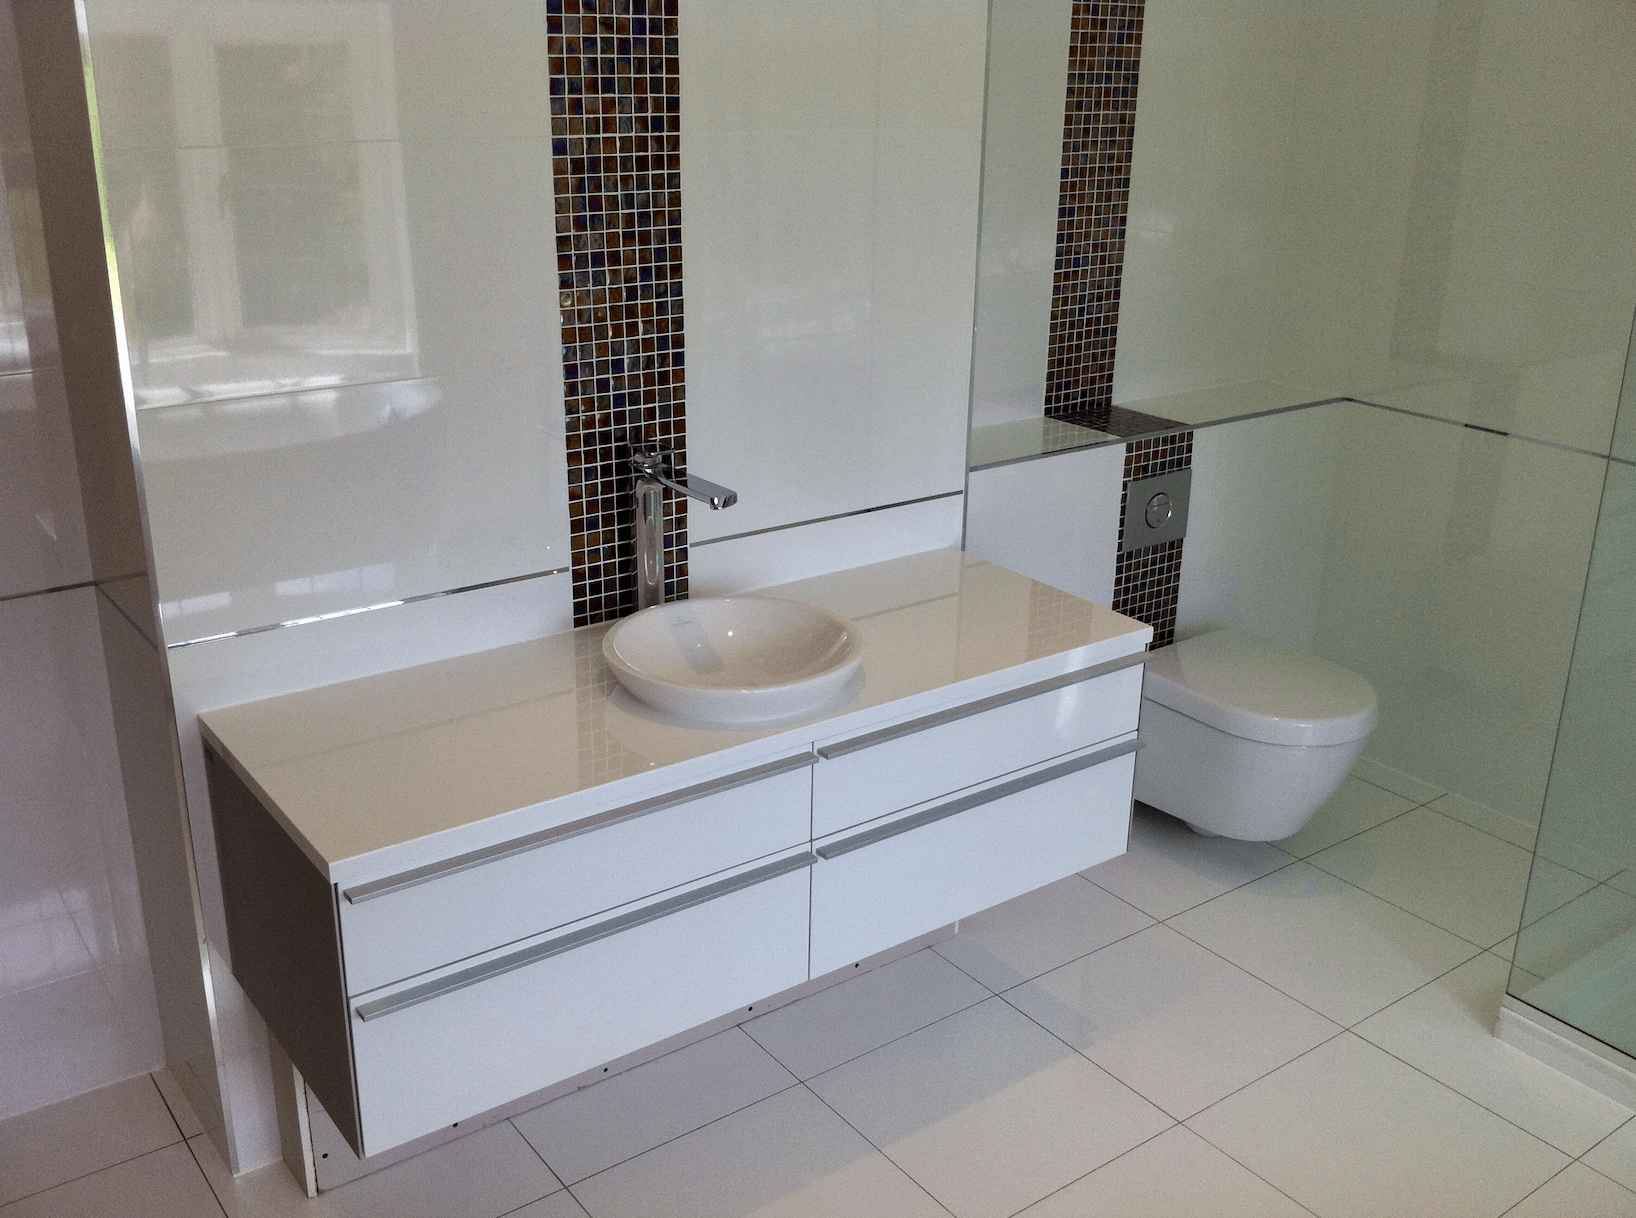 We love this feature panel on this bathroom, middle strip of mosaic tiles.